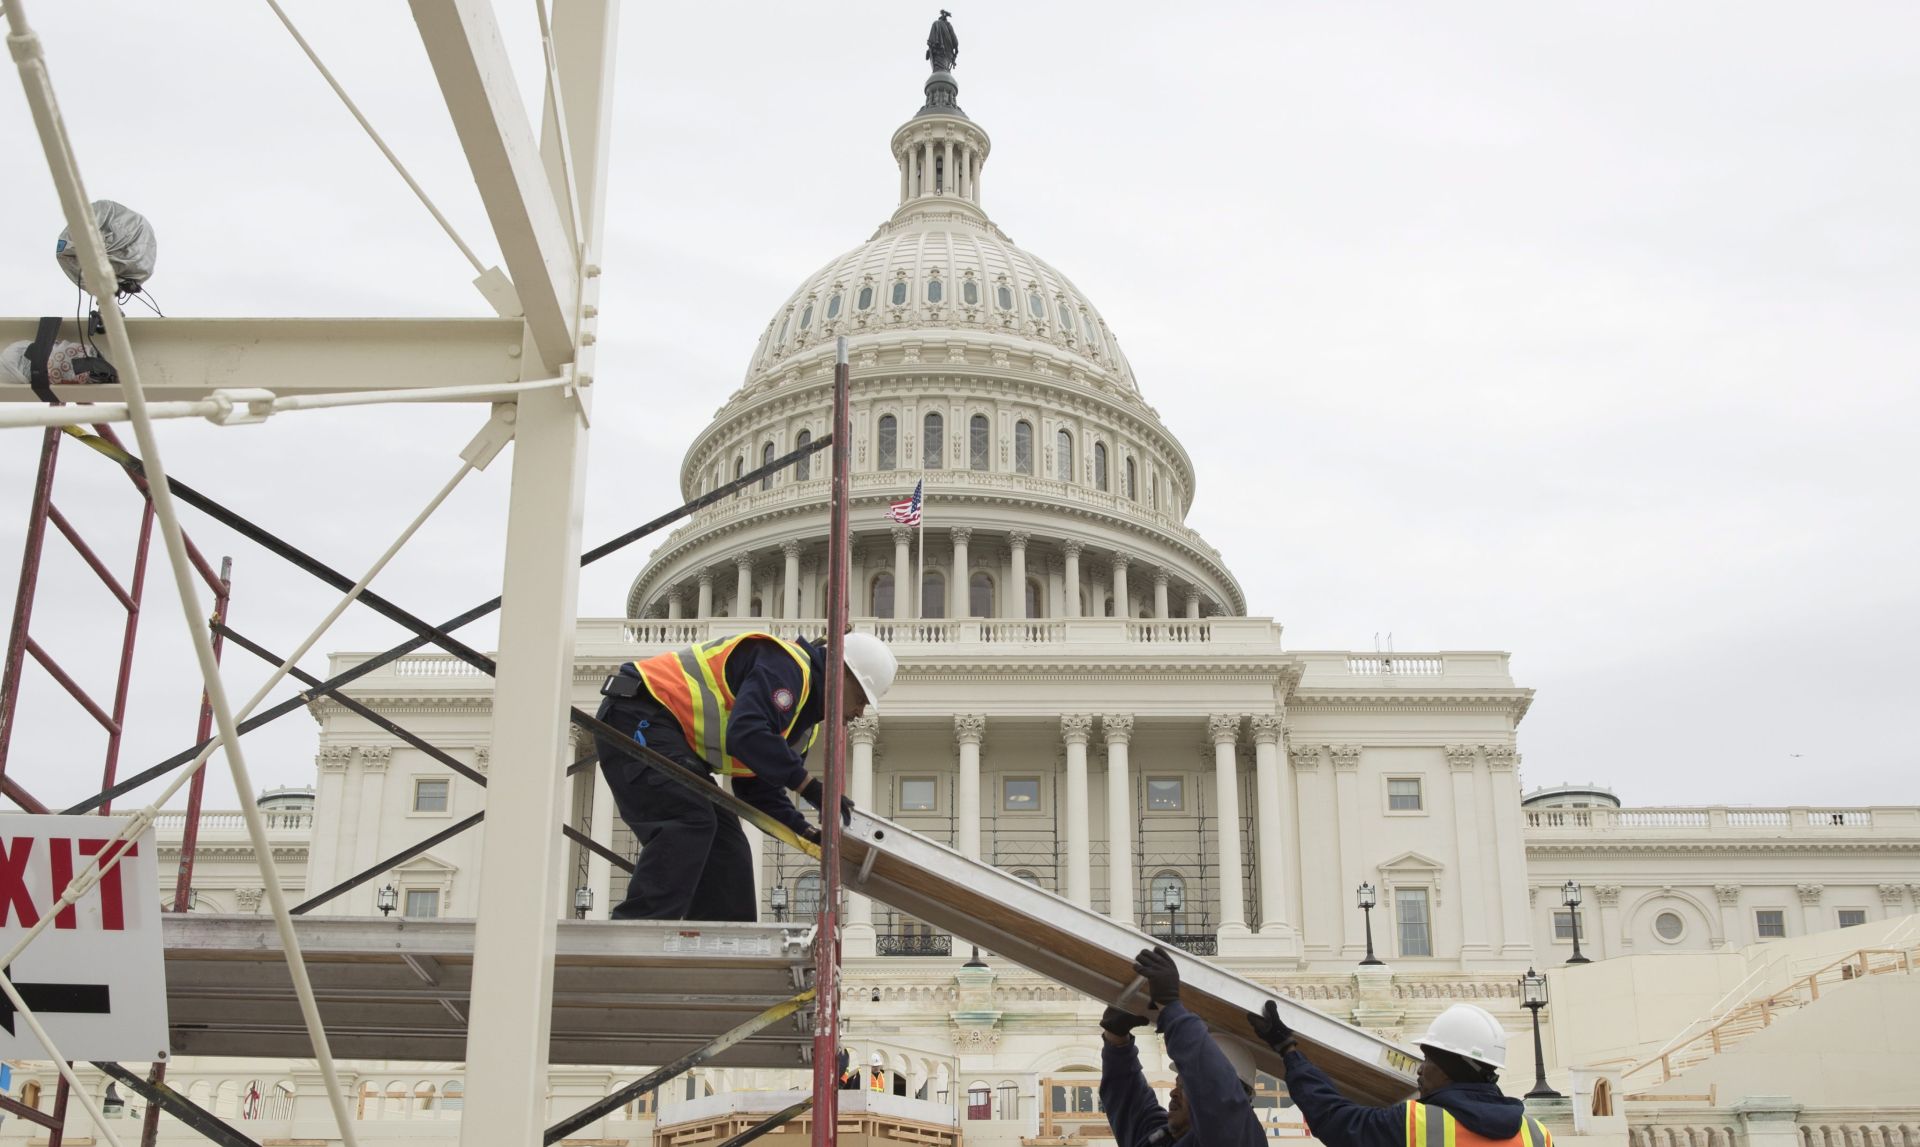 epa05666189 Employees of the Architect of the Capitol do work preparing the center camera stand for the 2017 Presidential Inauguration, at the West Front of the Capitol in Washington, DC, USA, 08 December 2016. On 20 January 2017, US President-elect Donald Trump will be sworn-in as the 45th President of the United States. The completed platform will hold approximately 1,600 Inaugural guests.  EPA/MICHAEL REYNOLDS